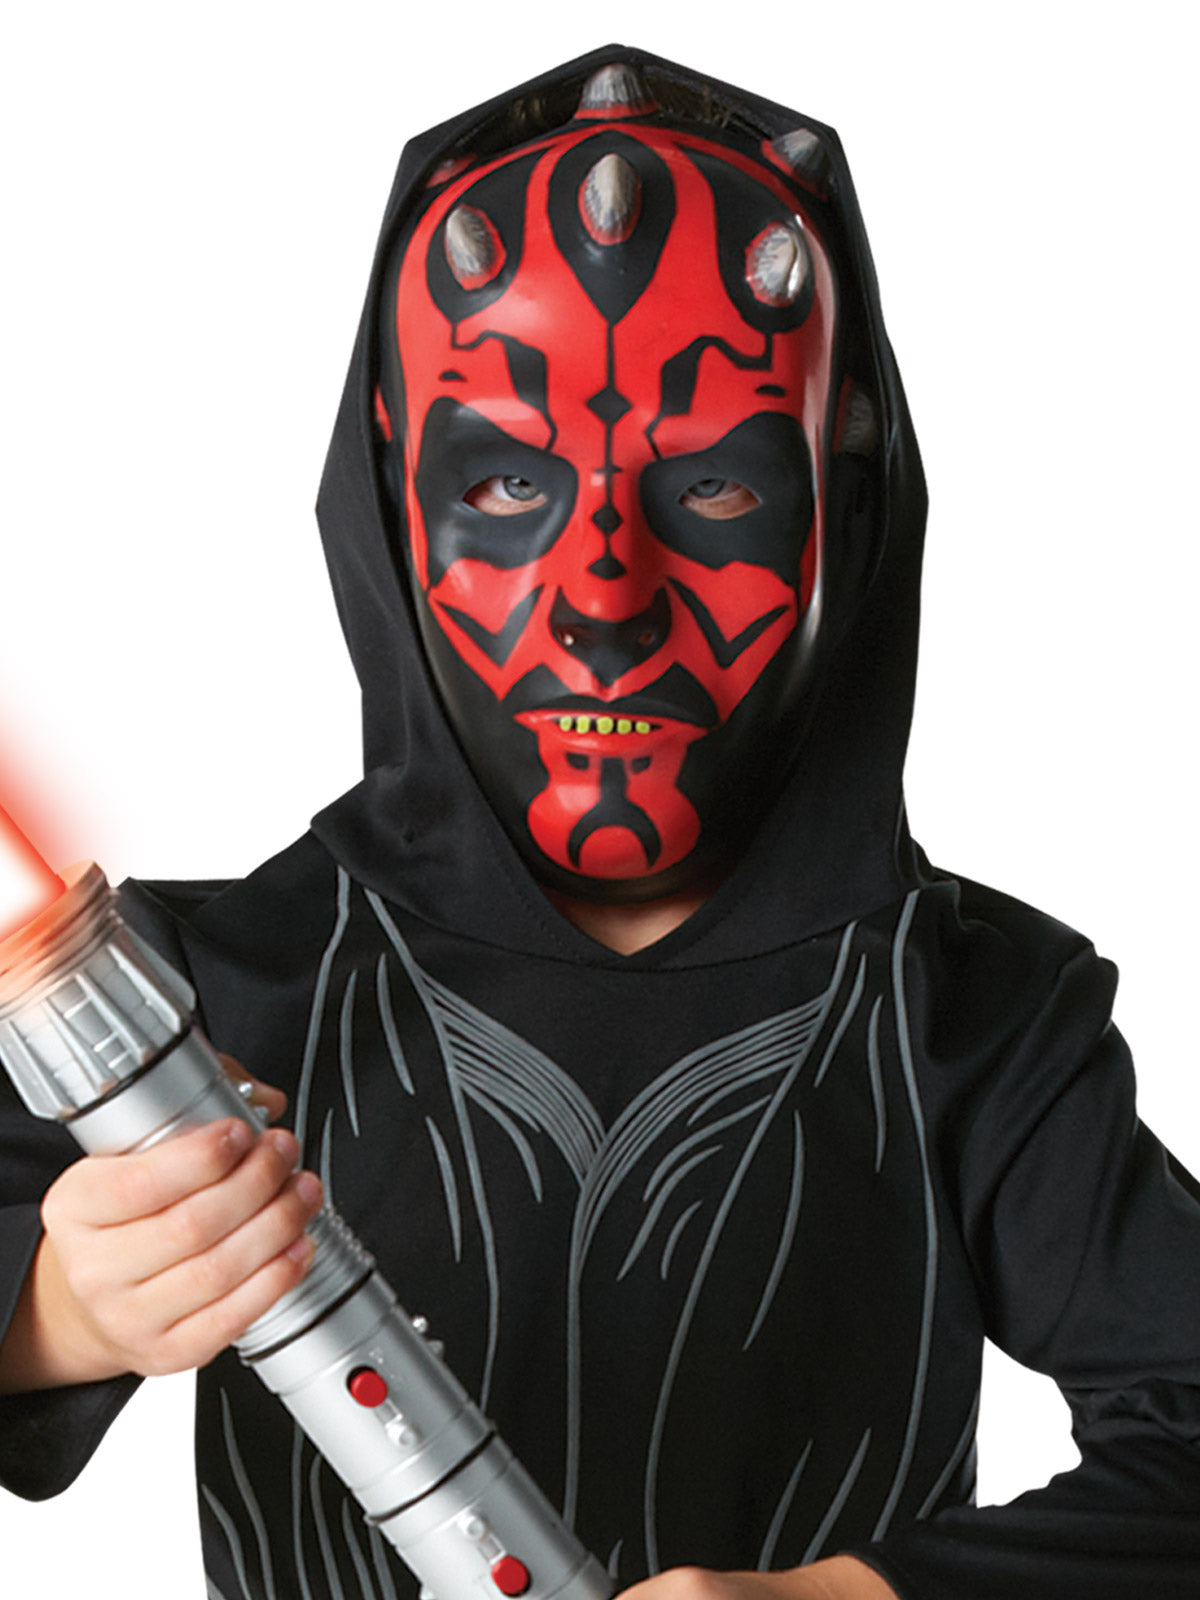 Star Wars Darth Maul Deluxe Child Costume with Mask - Licensed